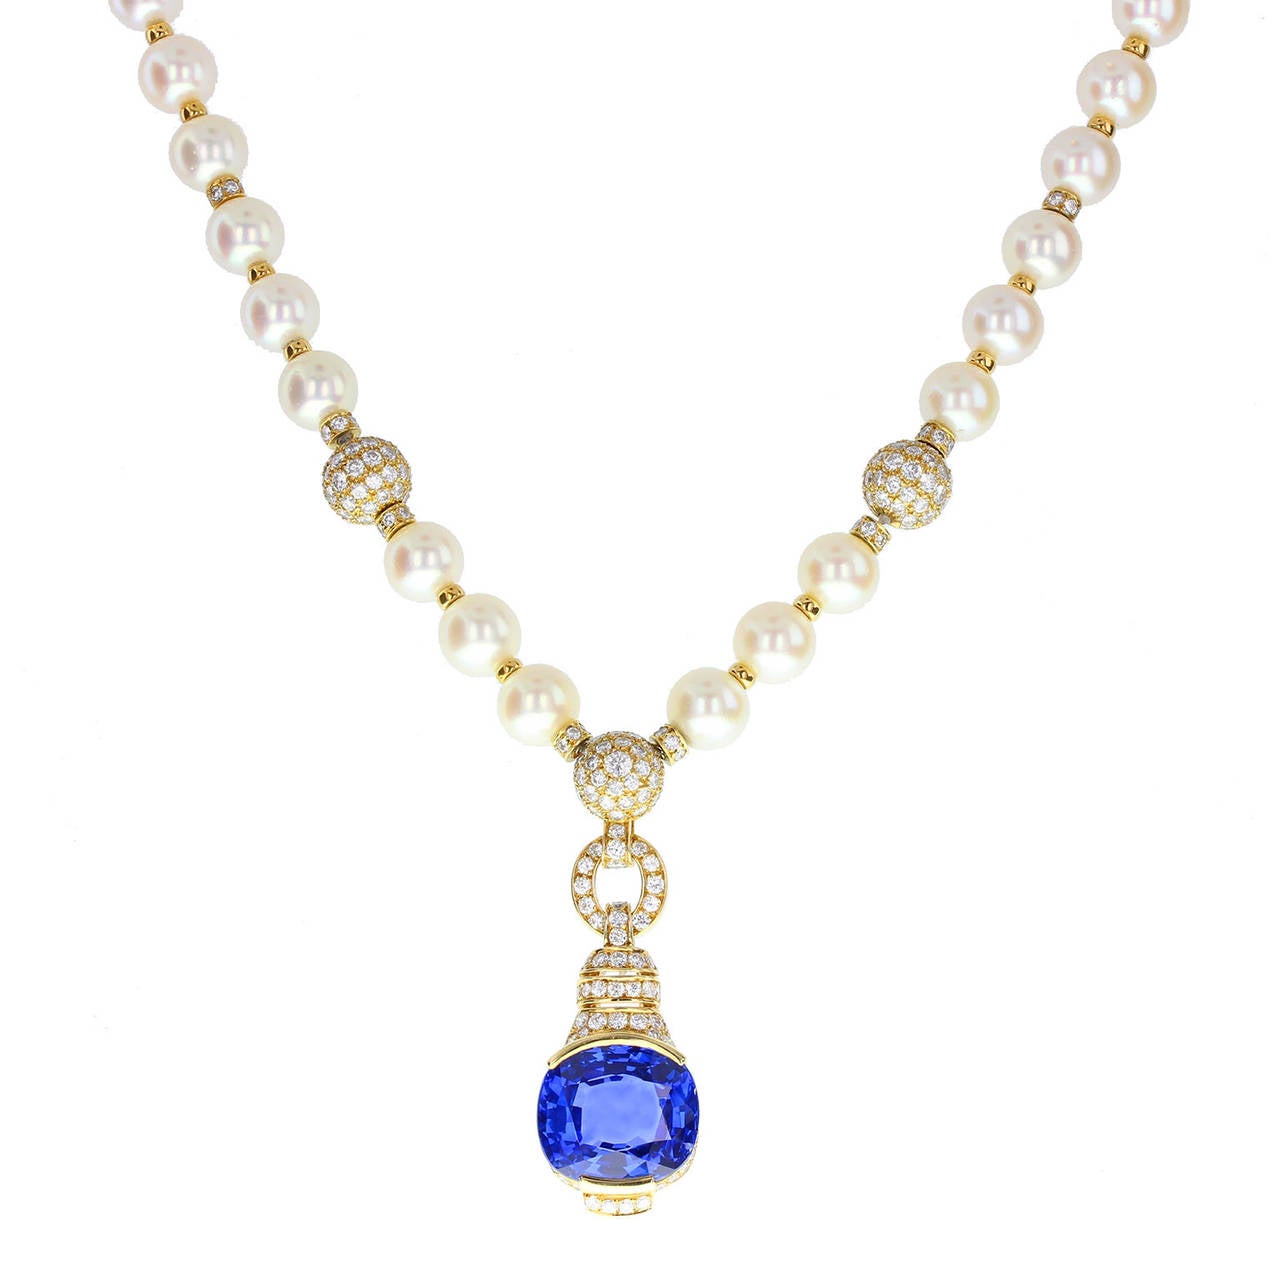 46 uniform cultured pearls of approximately 8.5mm strung to form a single row, terminating with a pave diamond gold bead from which a fancy diamond pave setting is suspended, mounted with a single 21 carat oval-cut blue sapphire.The front pearls are